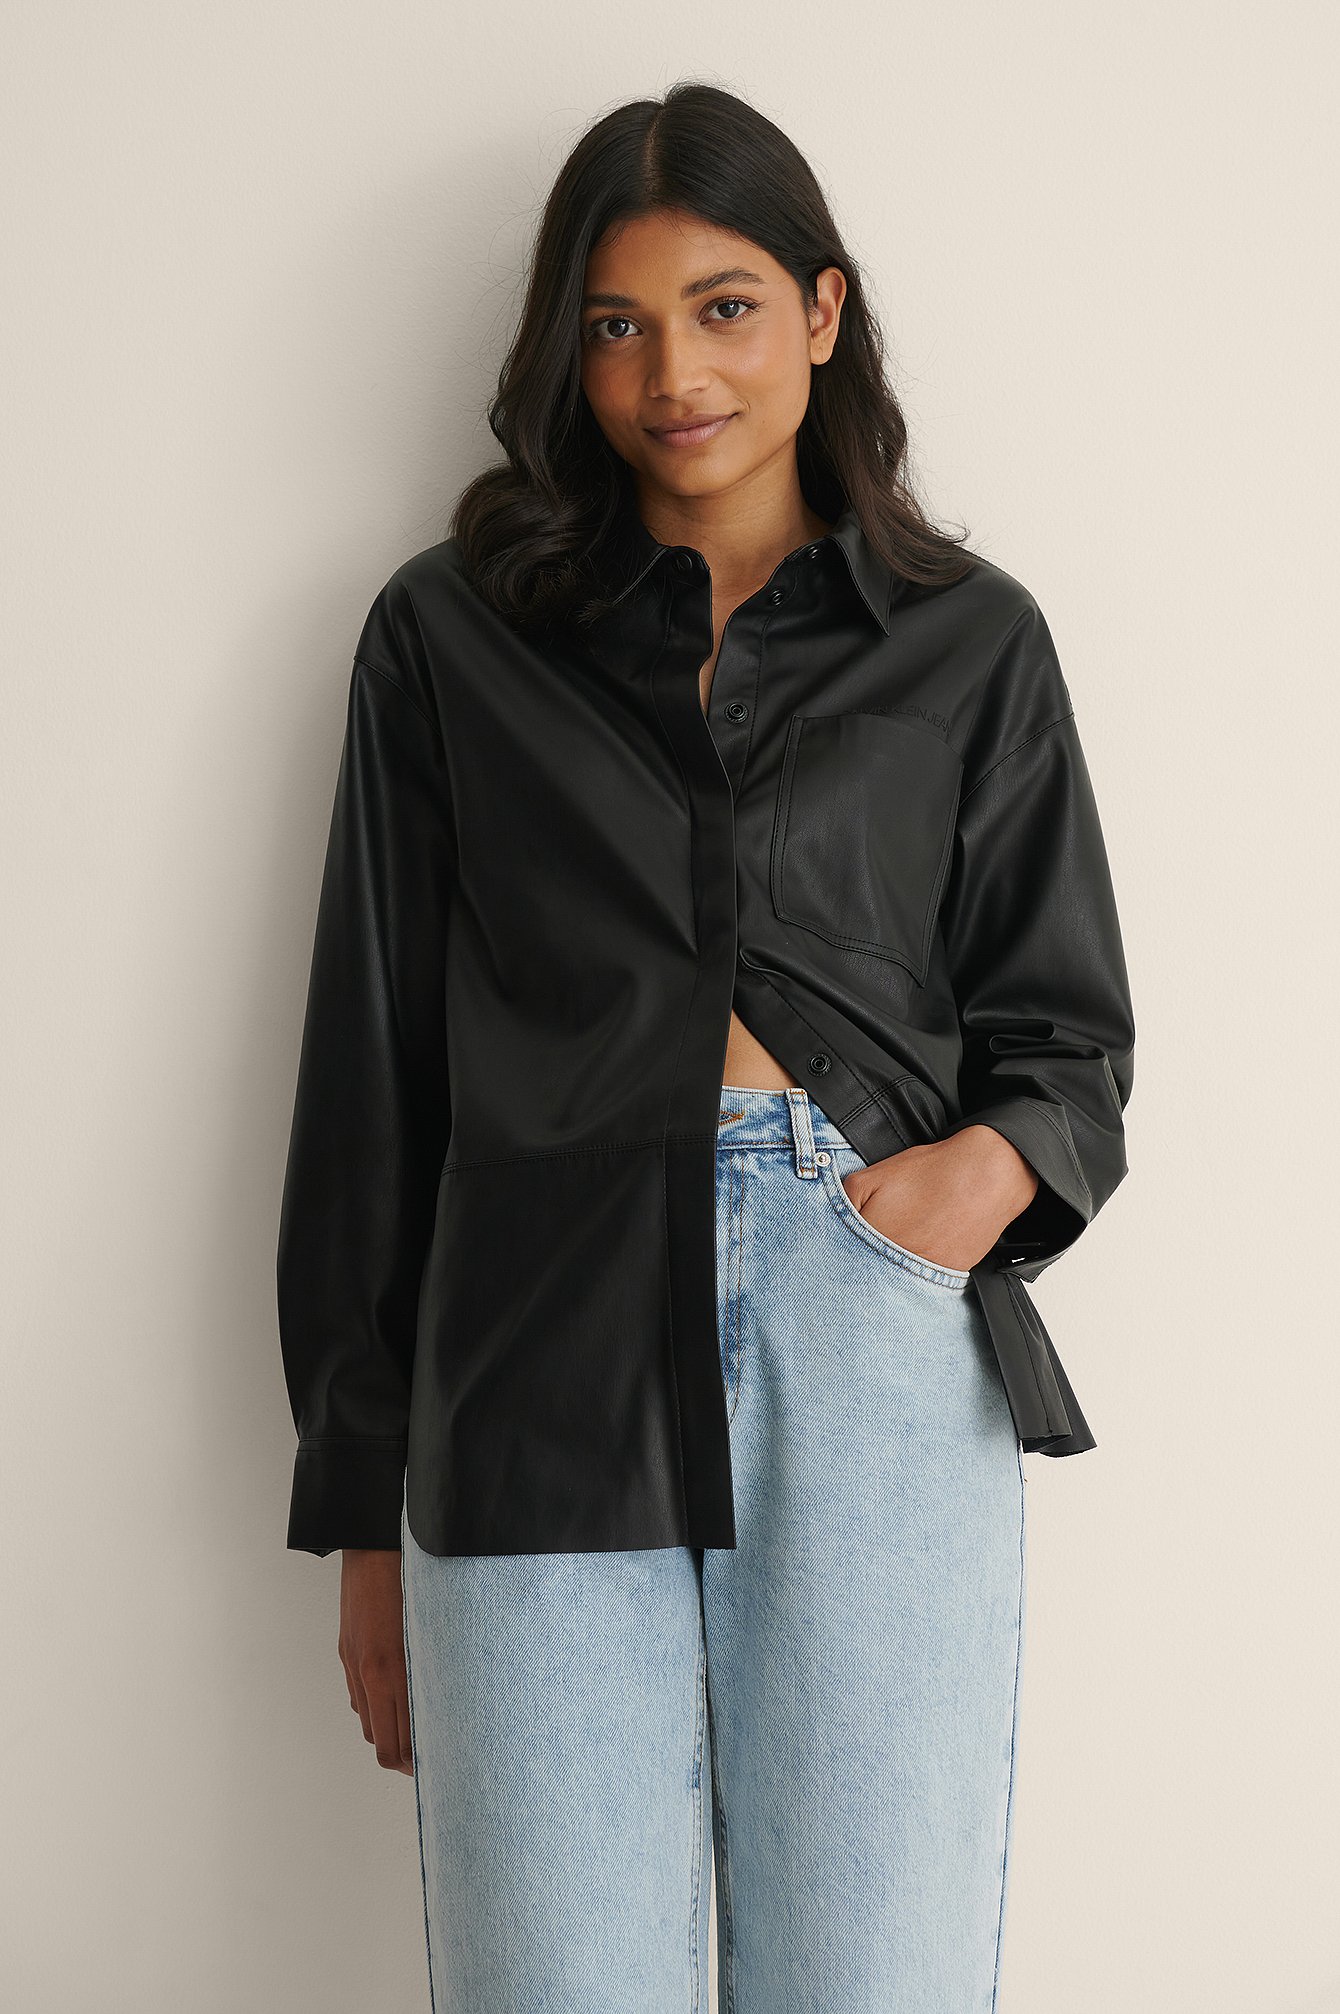 CK Black Faux Leather Overshirt